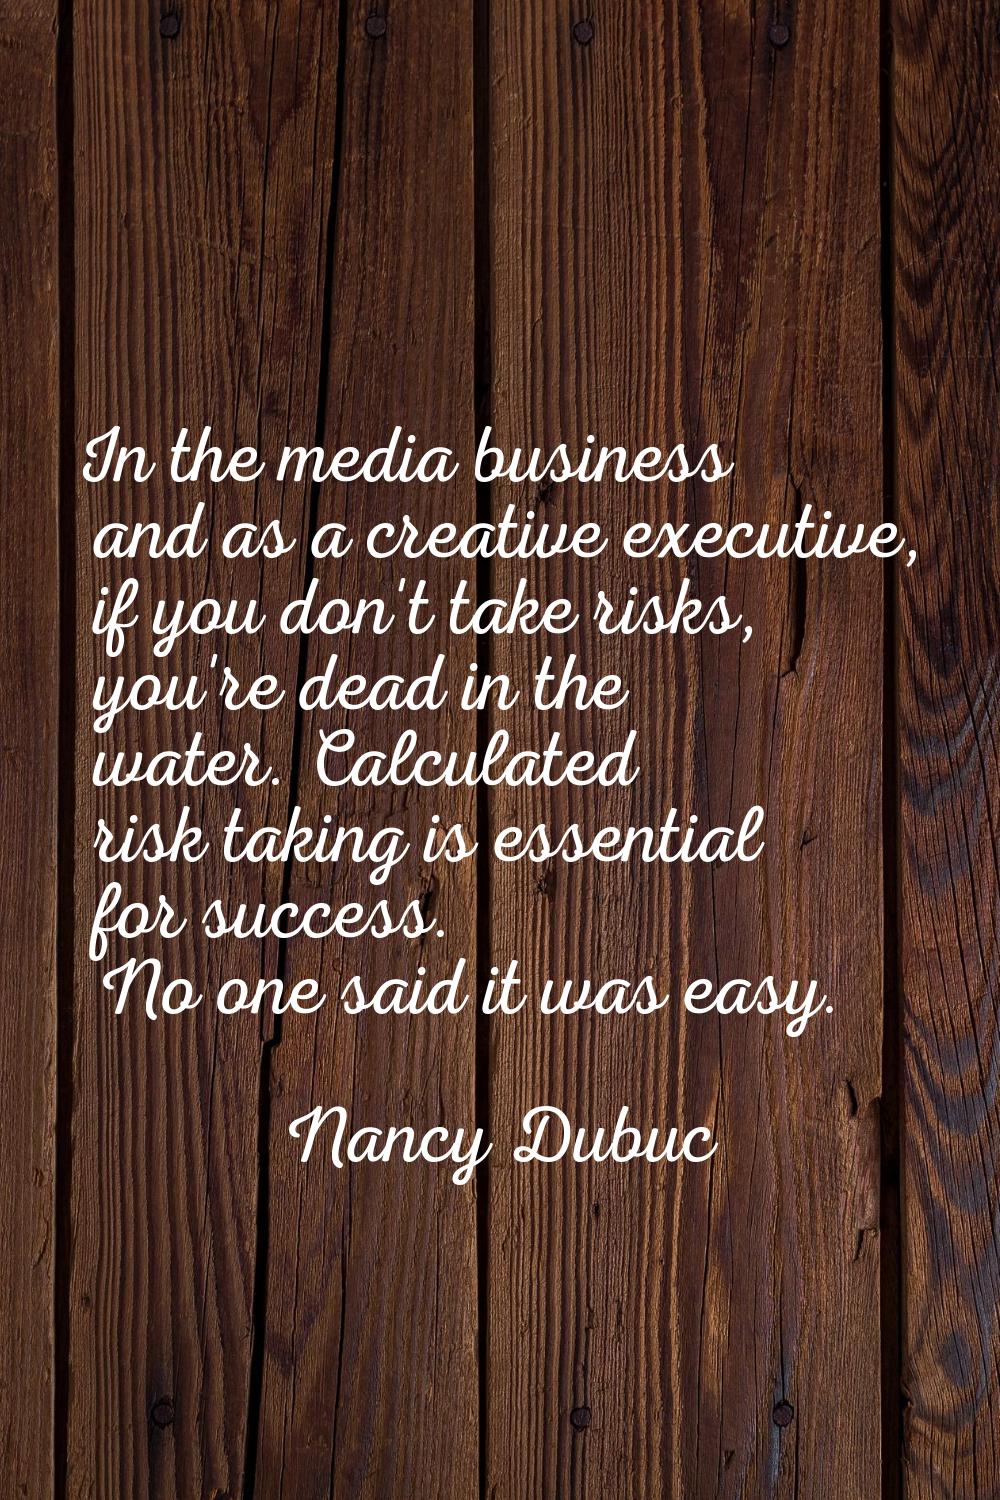 In the media business and as a creative executive, if you don't take risks, you're dead in the wate